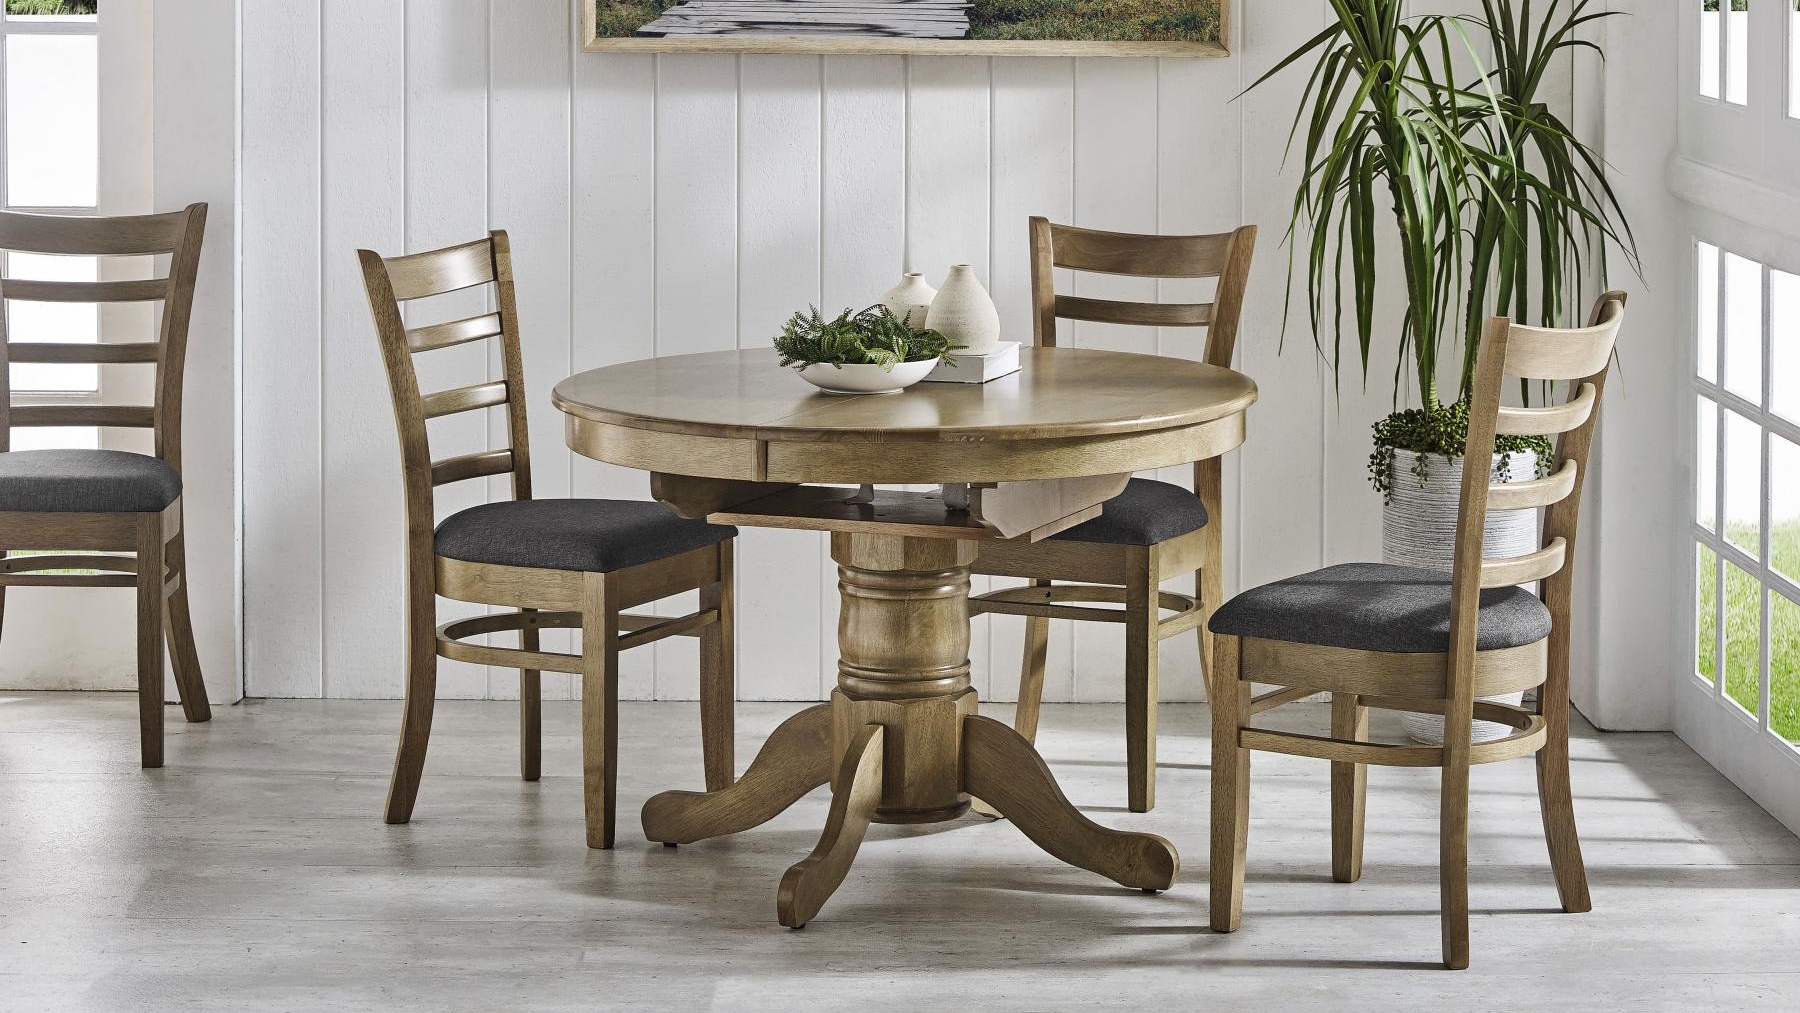 Large Round Dining Tables Seats 10 - Foter  Large round dining table, Round  dining room, Round dining room table